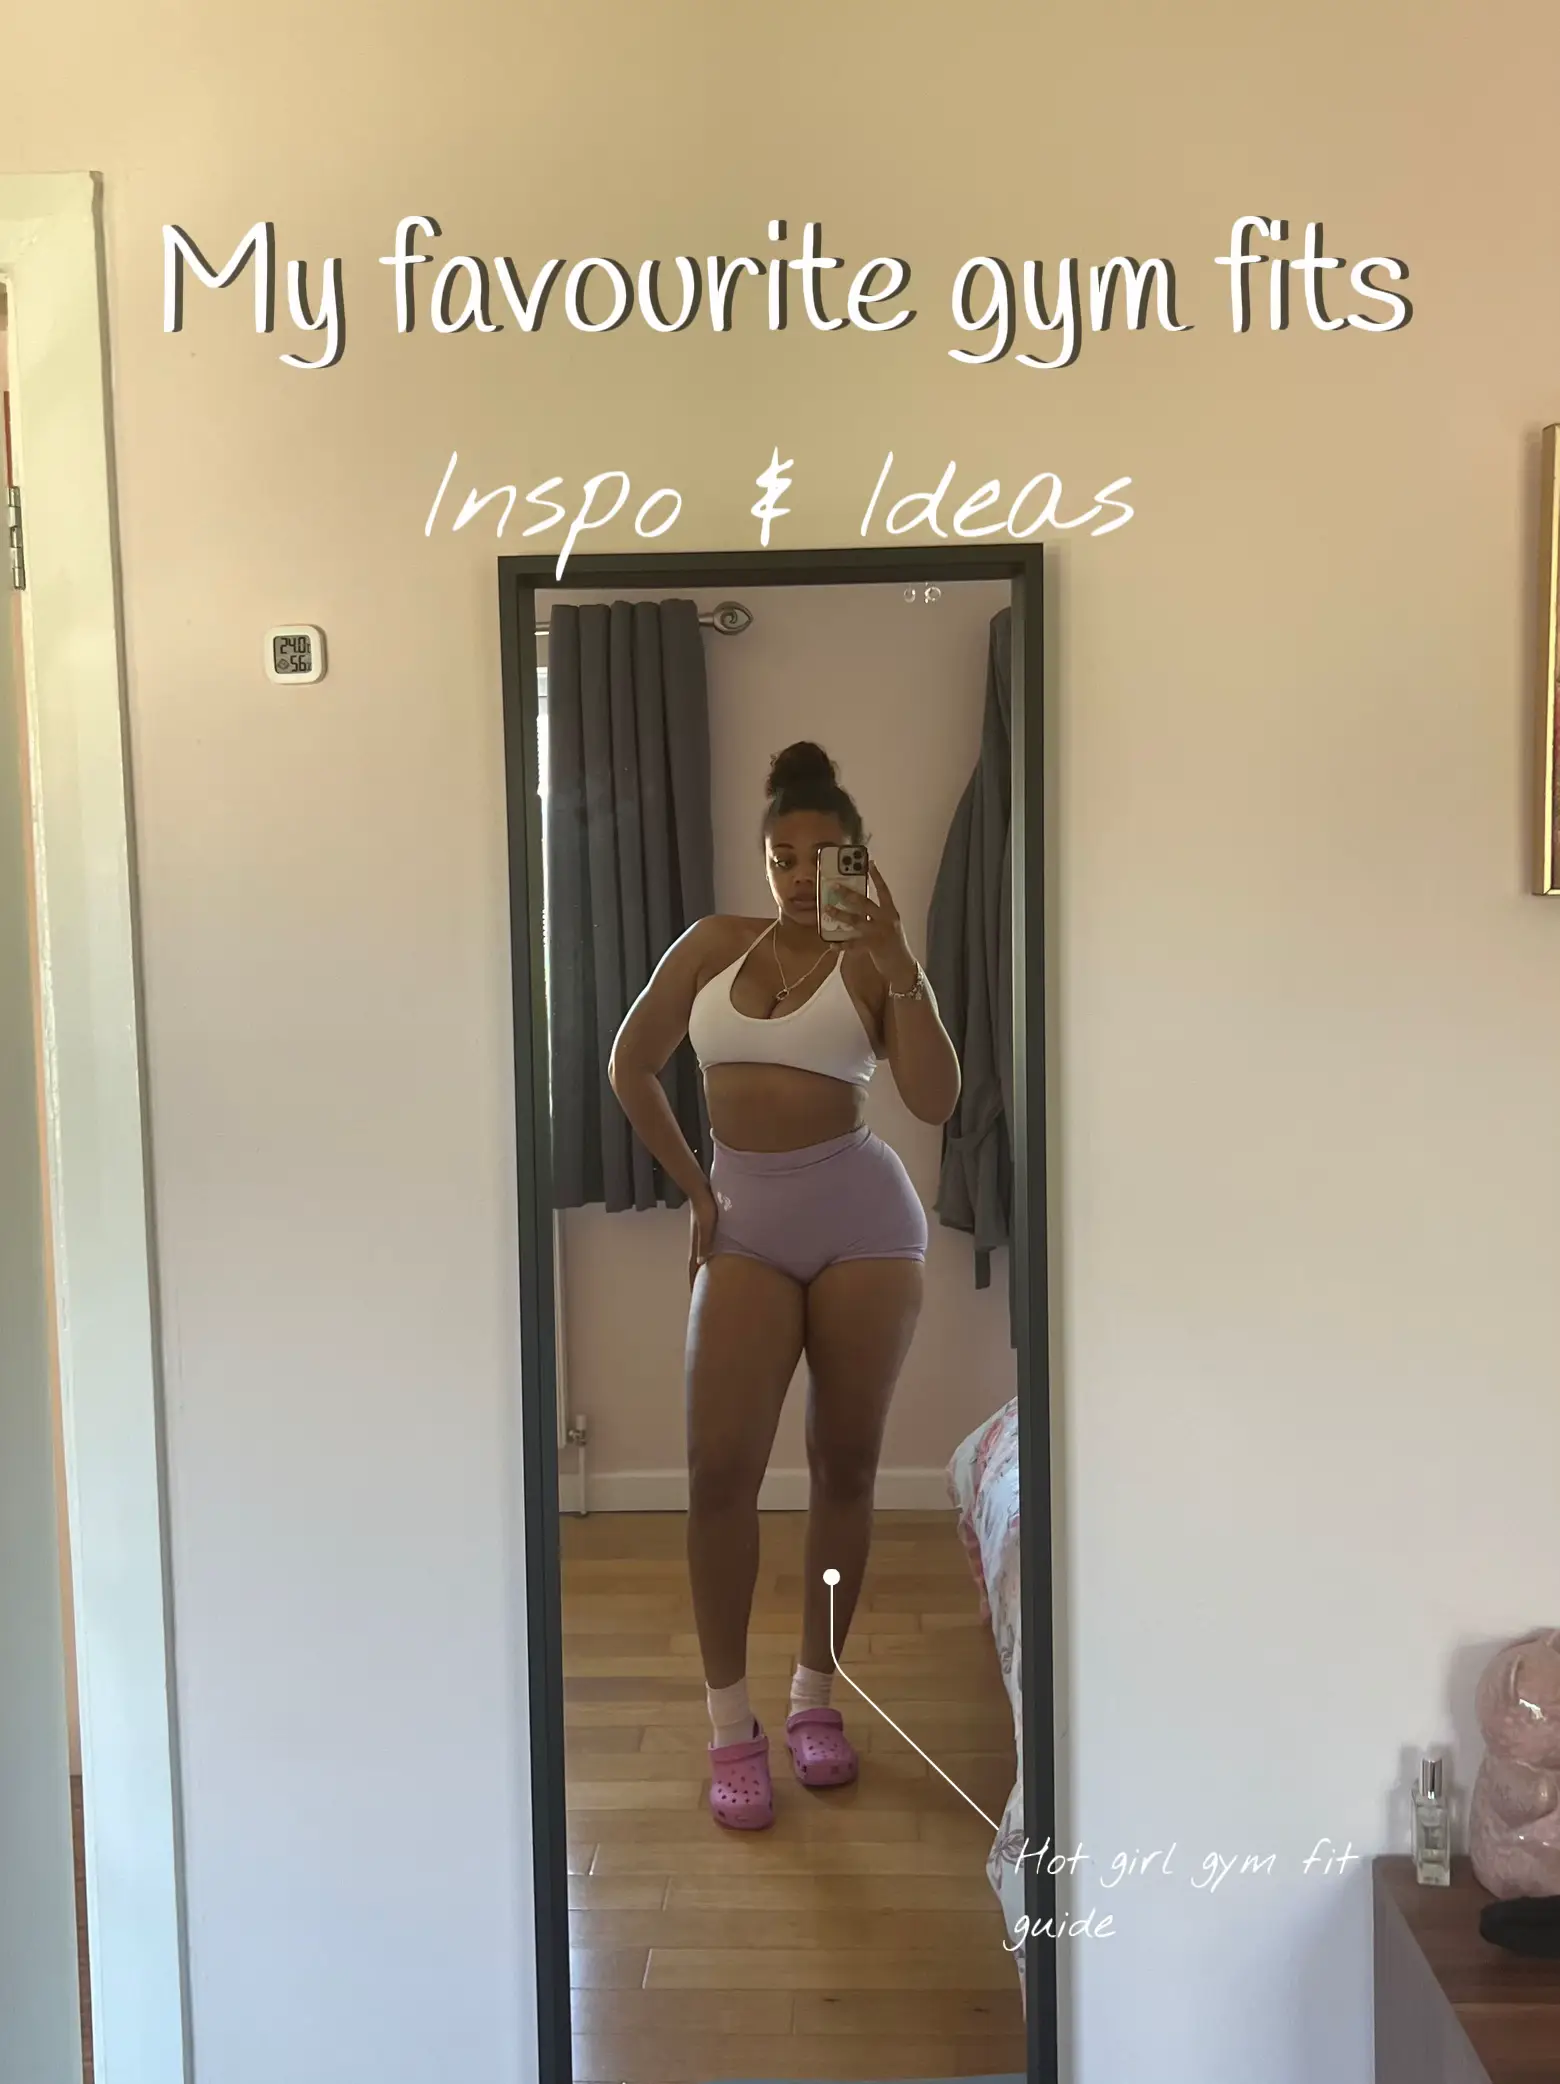 My favourite gym fits, Gallery posted by Tylamitchell